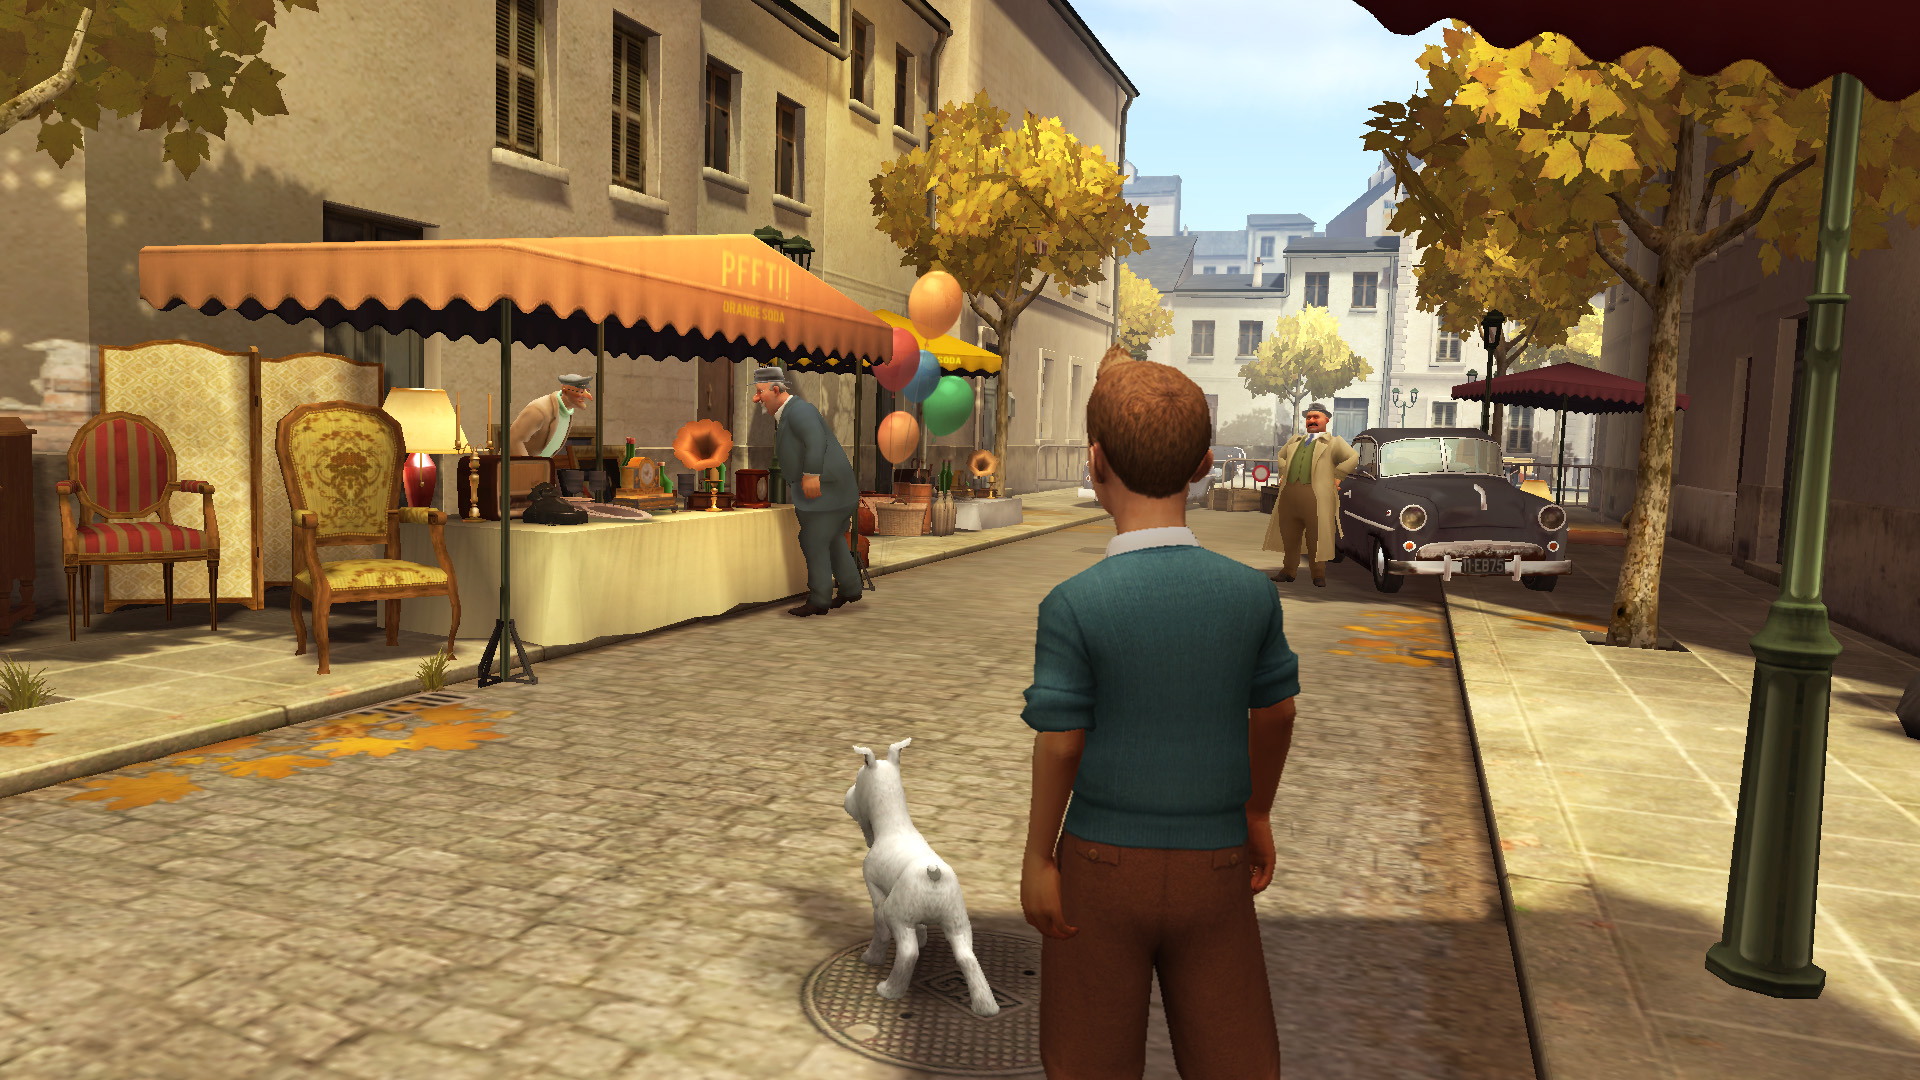 The Adventures of Tintin: The Secret of the Unicorn - The Game - screenshot 4